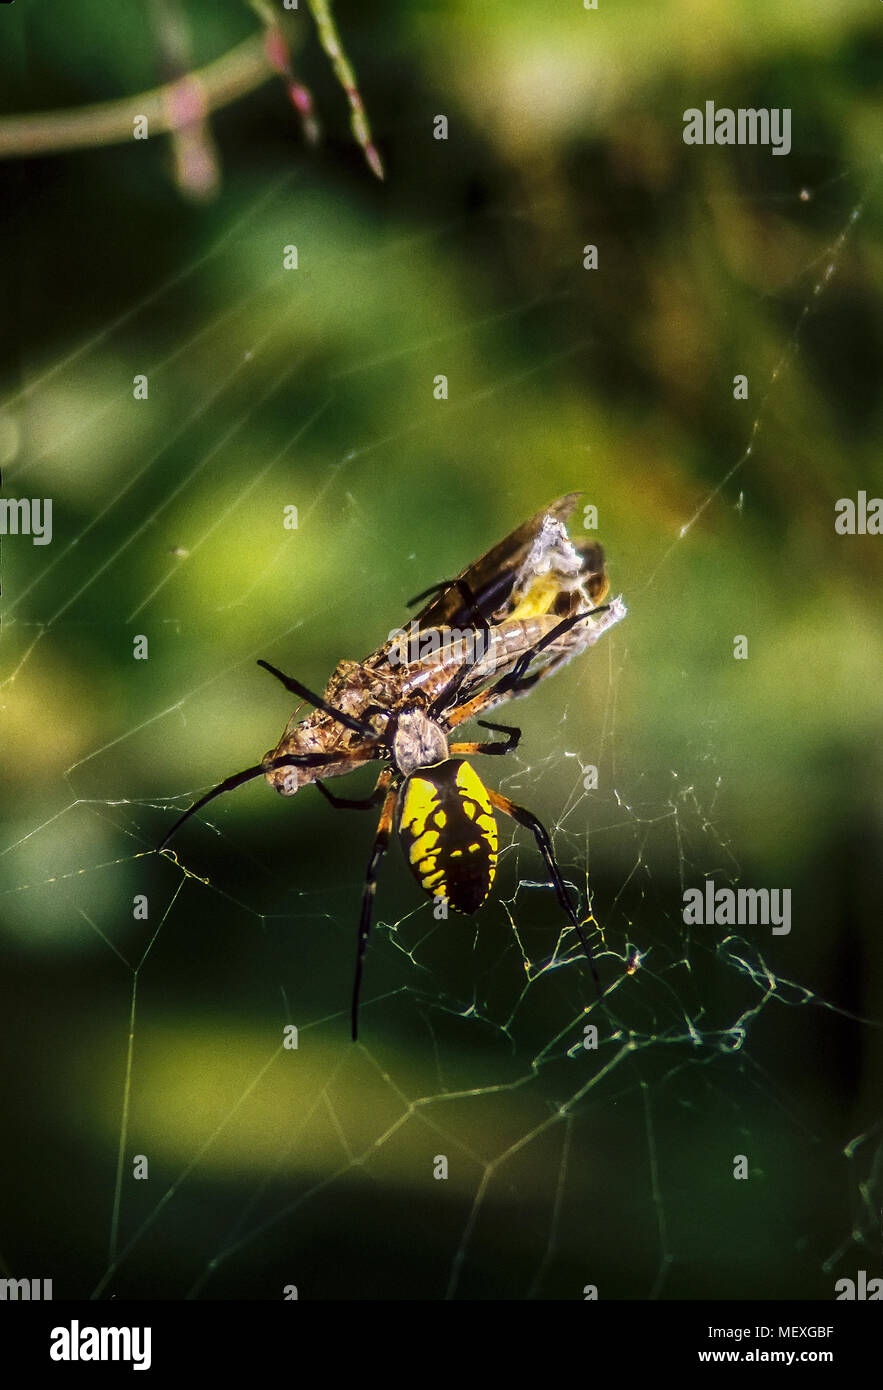 A Yellow Garden Spider, Argiope aurantia, kills and wraps a grasshopper in silk after it became stuck in the spider's web. Stock Photo